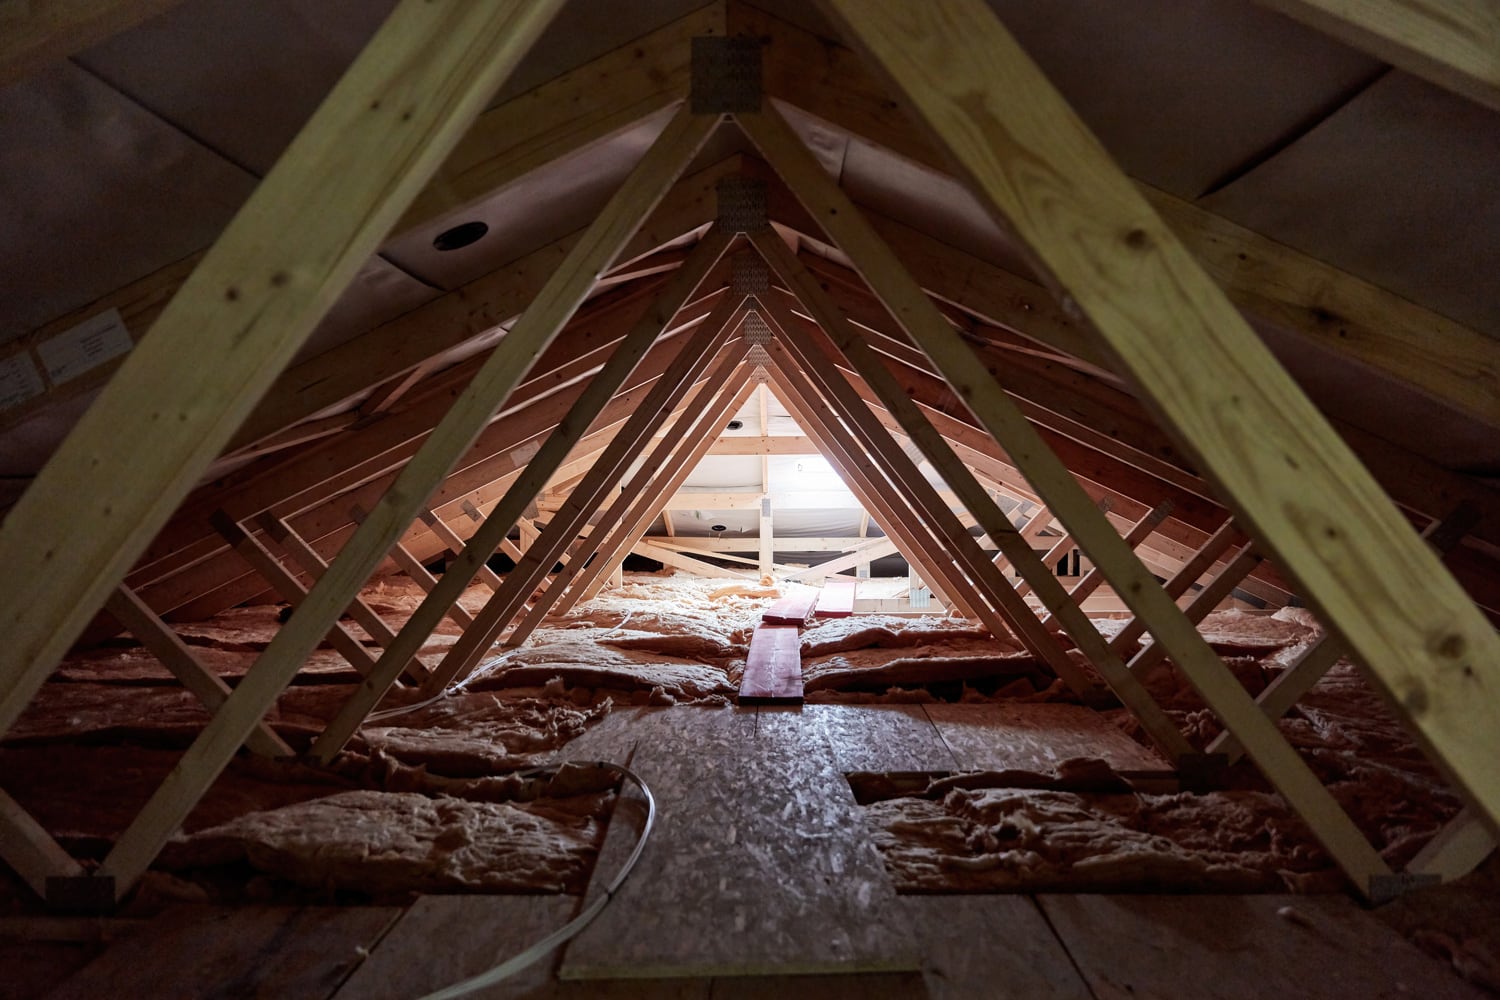 Dark attic with a small window and wooden beams in a new build house